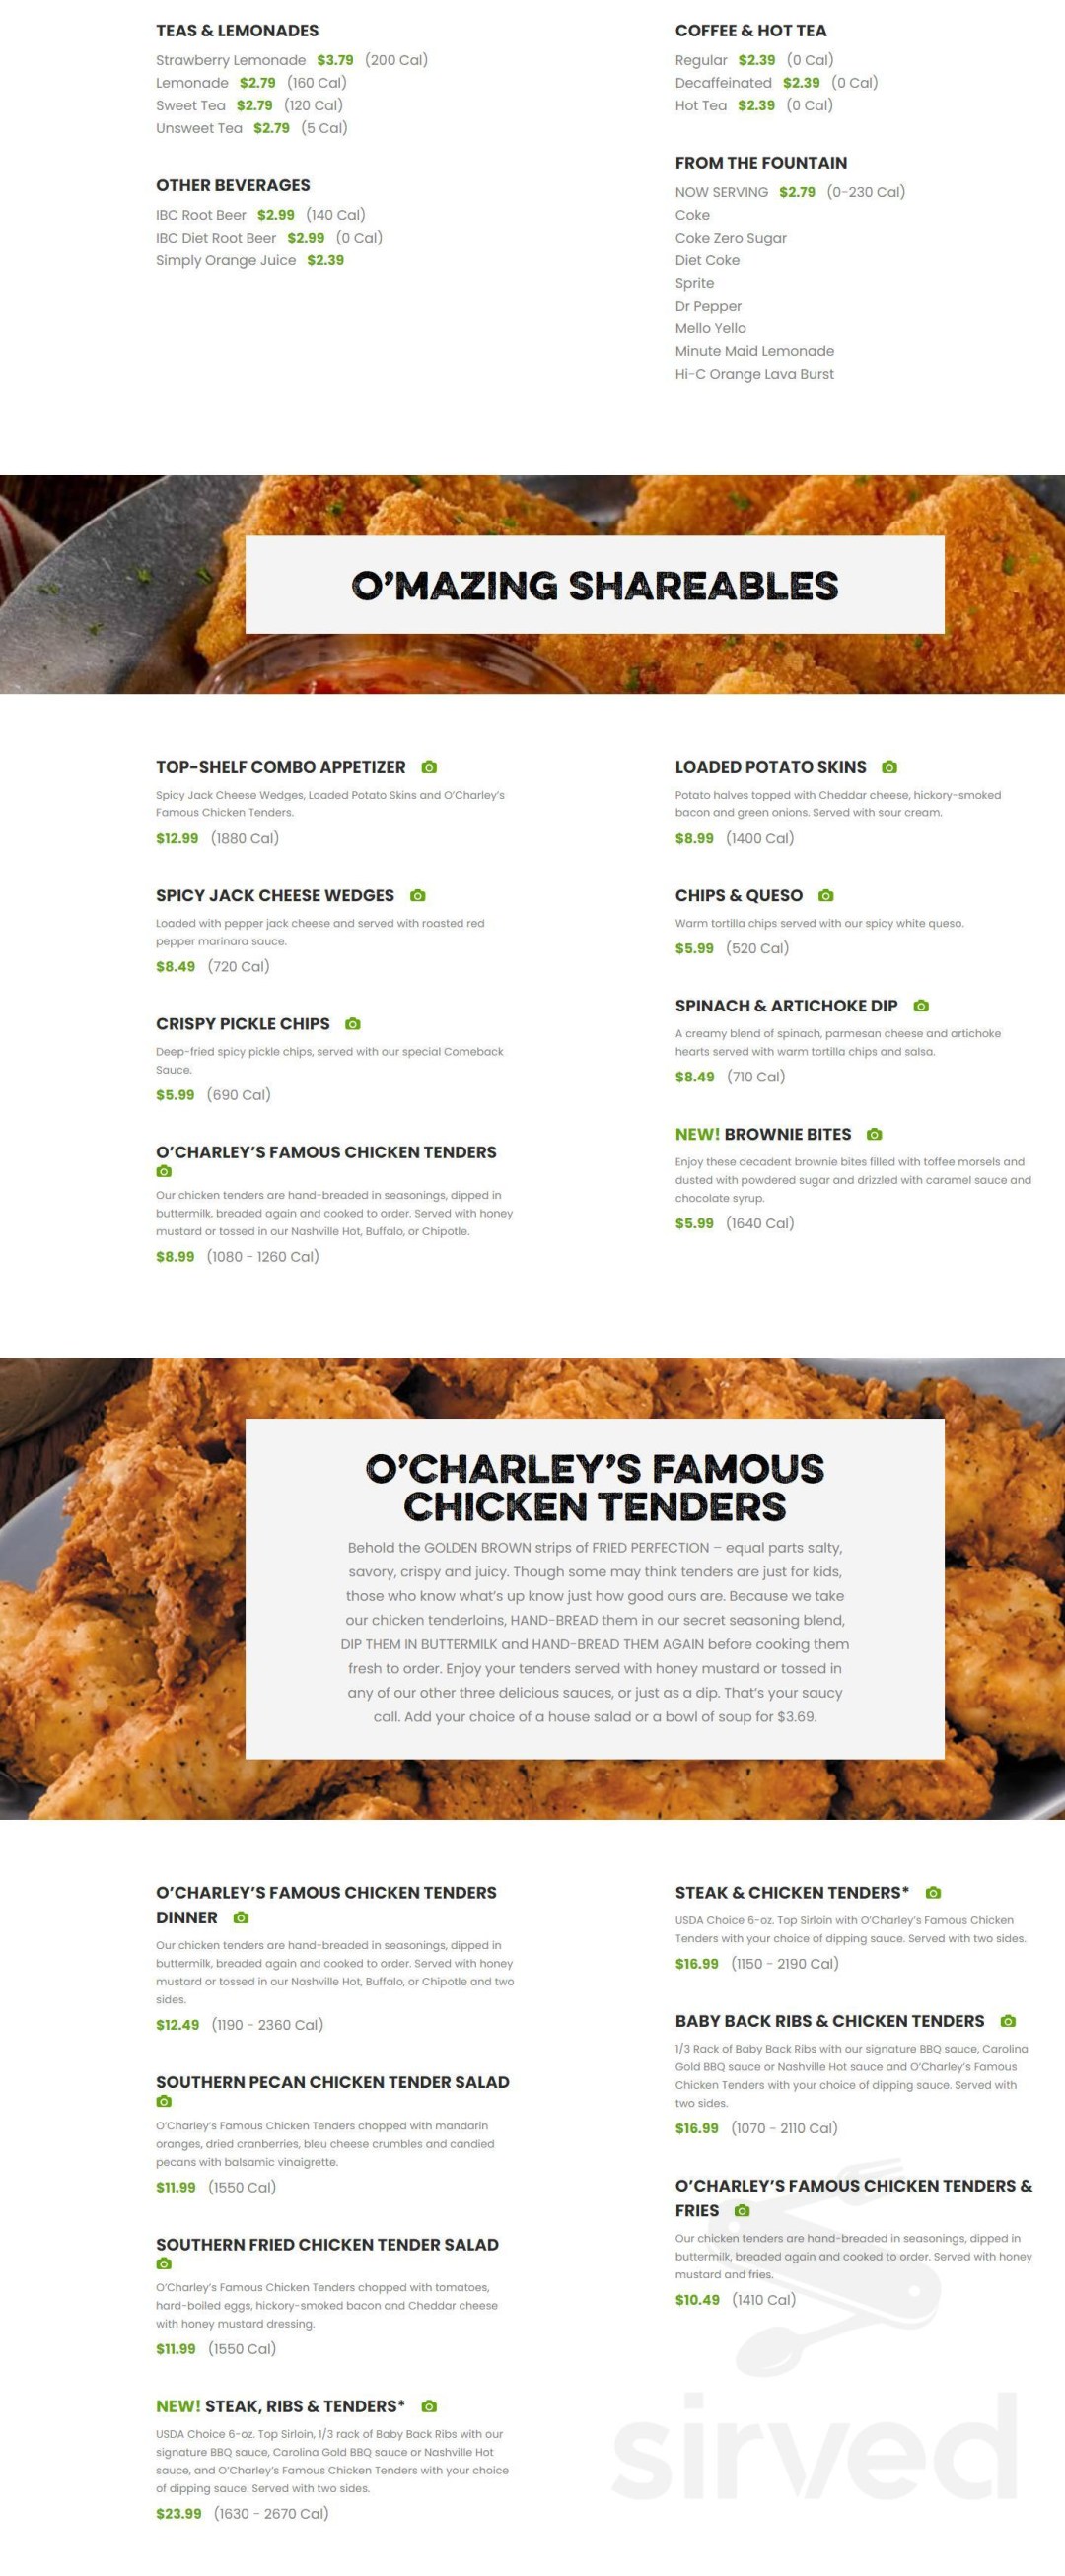 Picture of: O’Charley’s Restaurant & Bar menu in Shively, Kentucky, USA